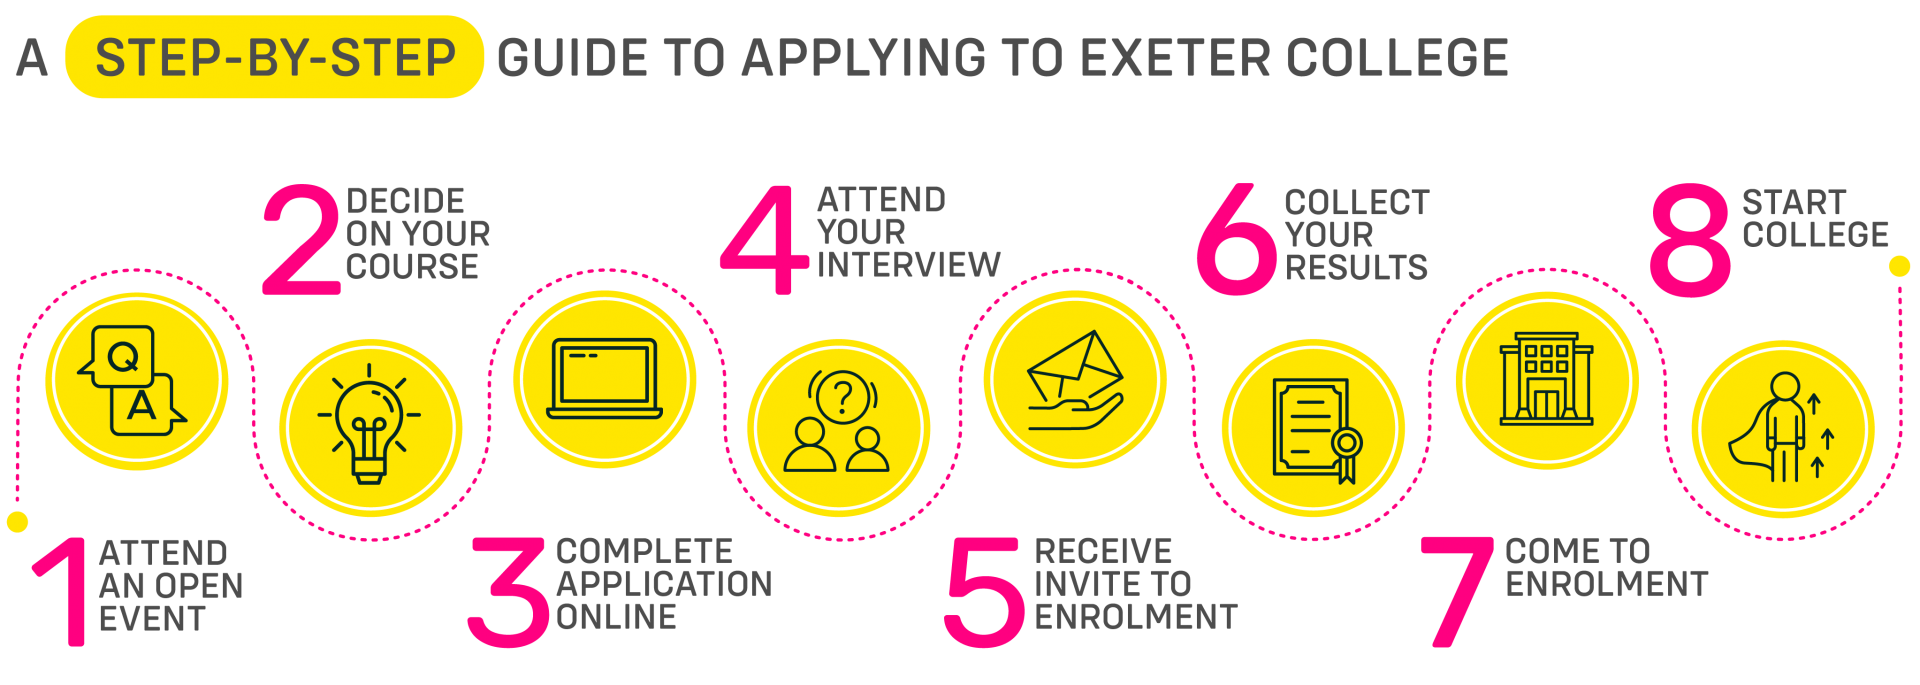 A Step-by-Step Guide to Applying to Exeter College graphic: 
1) Attend an Open Event
2) Decide on your course or Apprenticeship
3) Complete your application via our website
4) Attend an interview
5) We will invite you to enrolment
6) Collect your results
7) Come to enrolment
8) Start College!